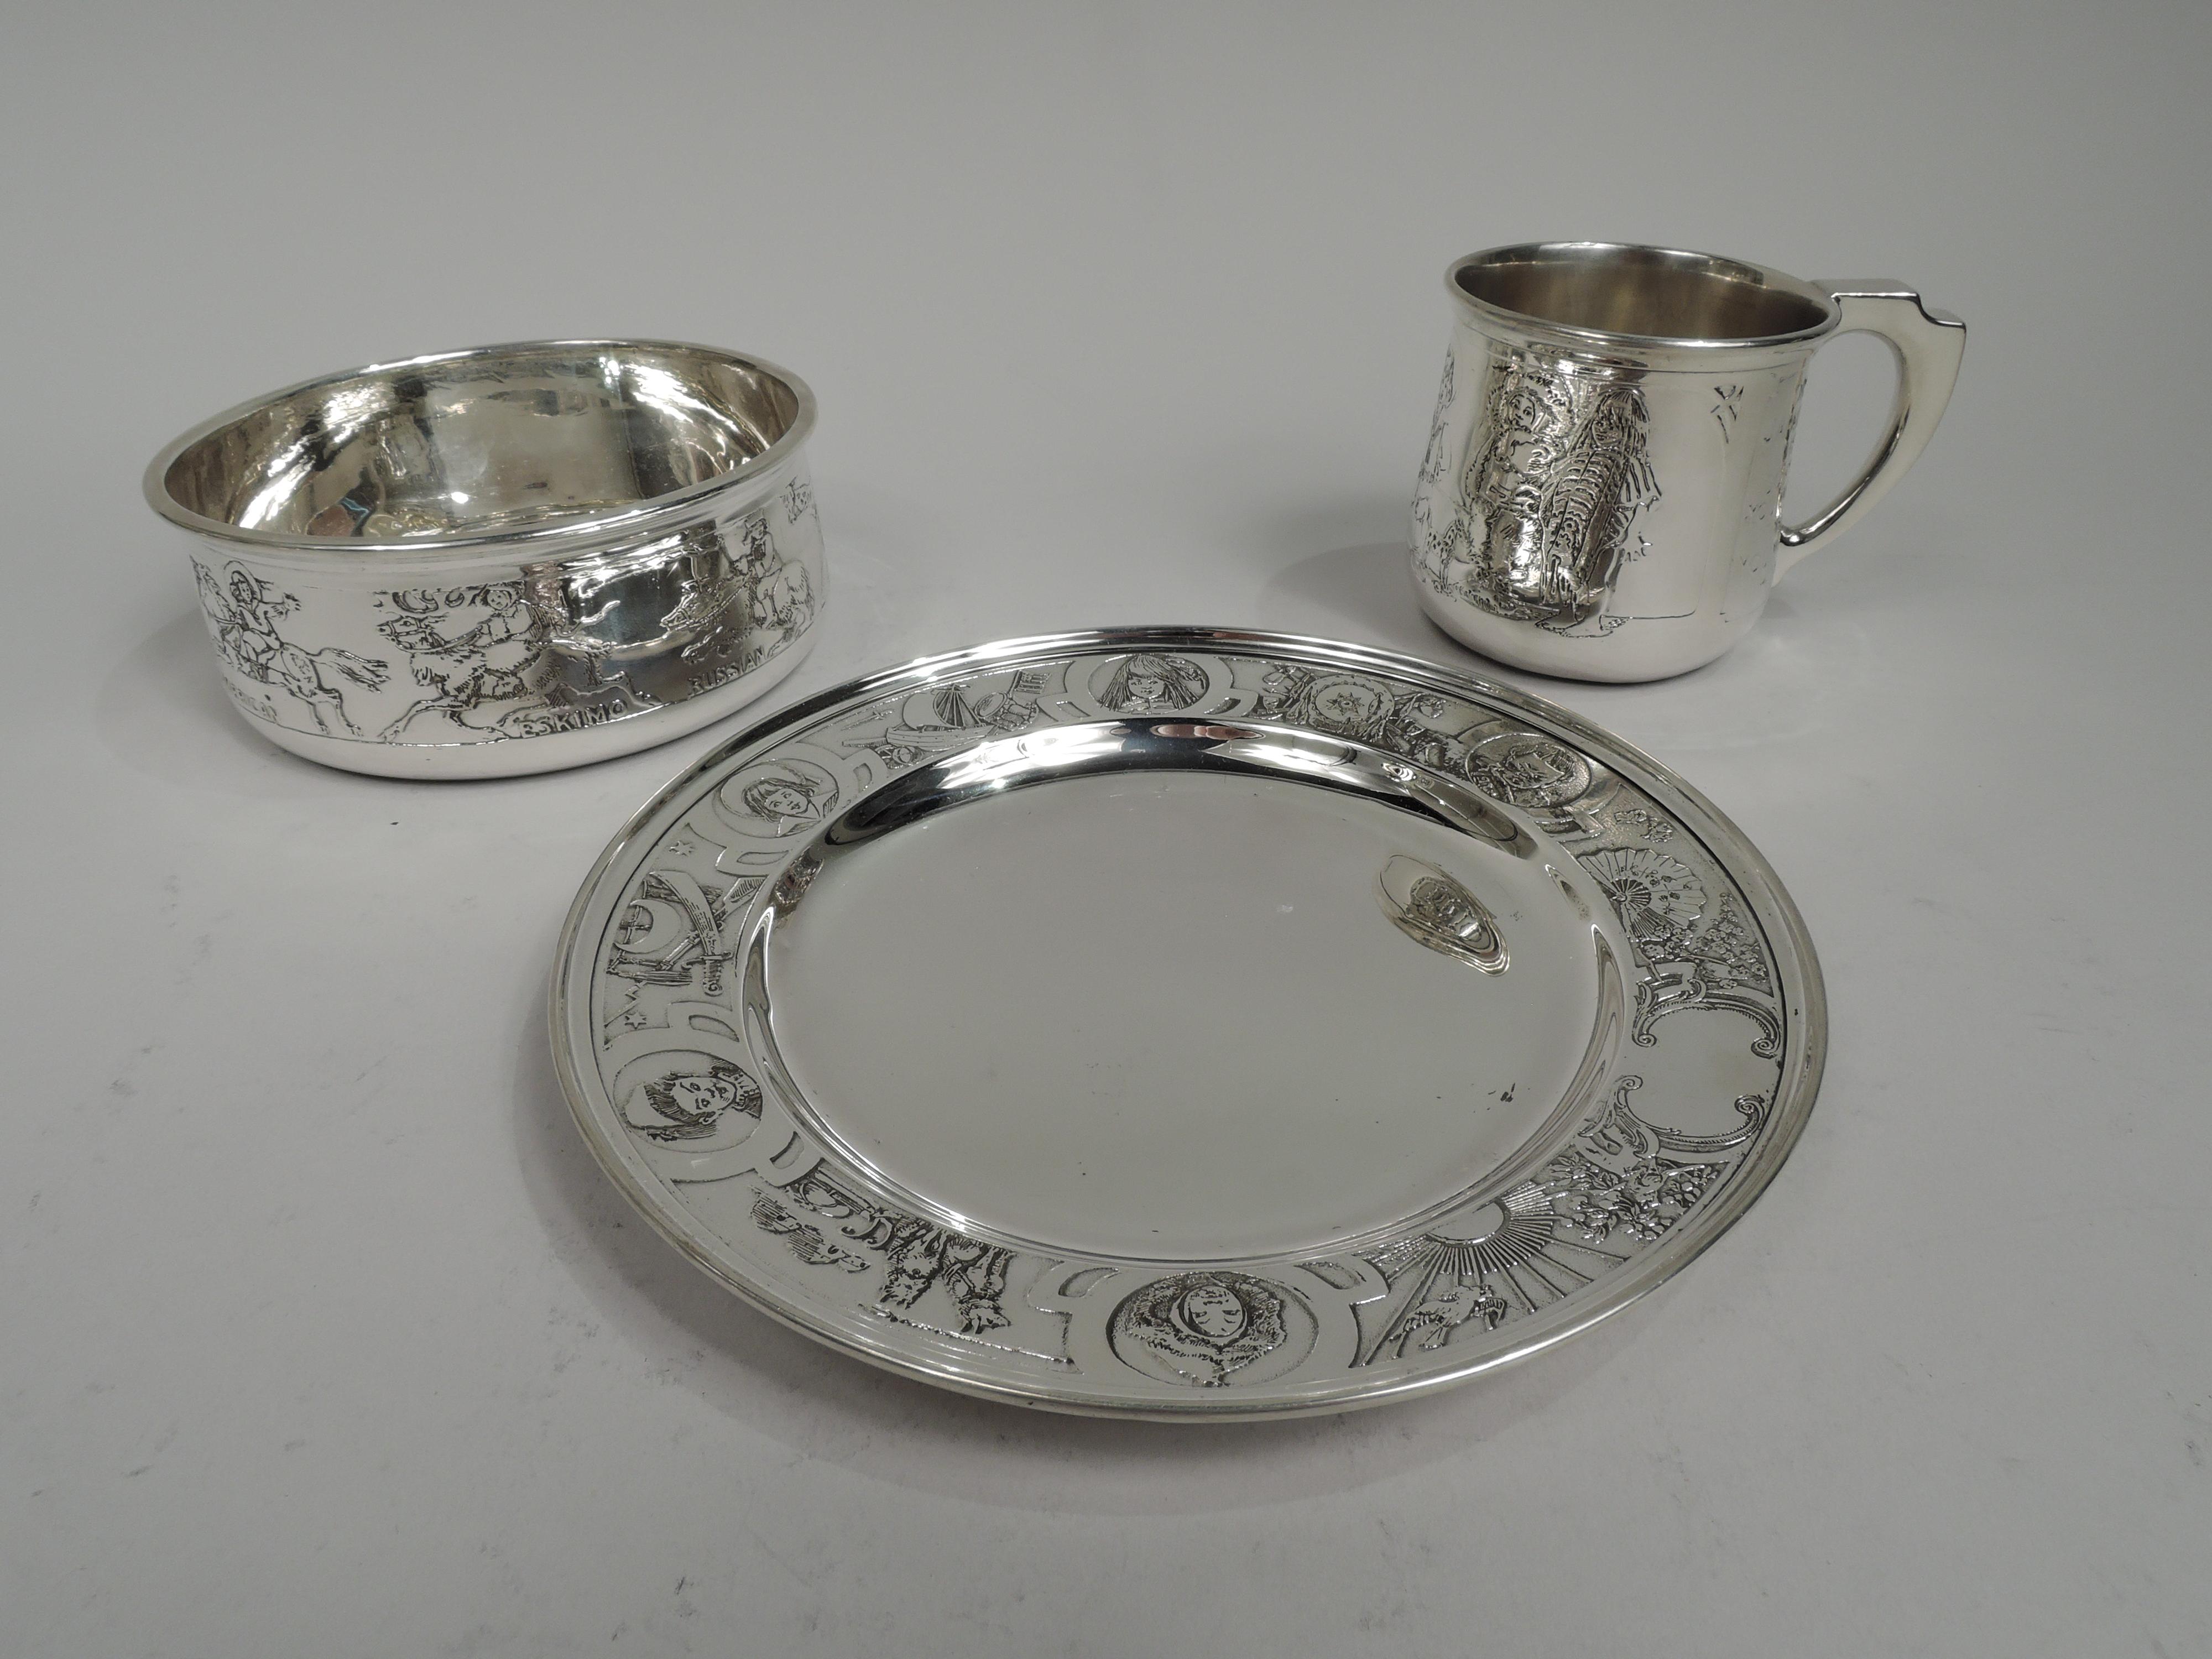 Turn-of-the-century sterling silver baby set rich in period assumptions. Made by William B. Kerr in Newark. This set comprises cup, bowl, and plate.

Cup has acid-etched frieze depicting sailor-suited, flag-holding, all-American boy with exotic